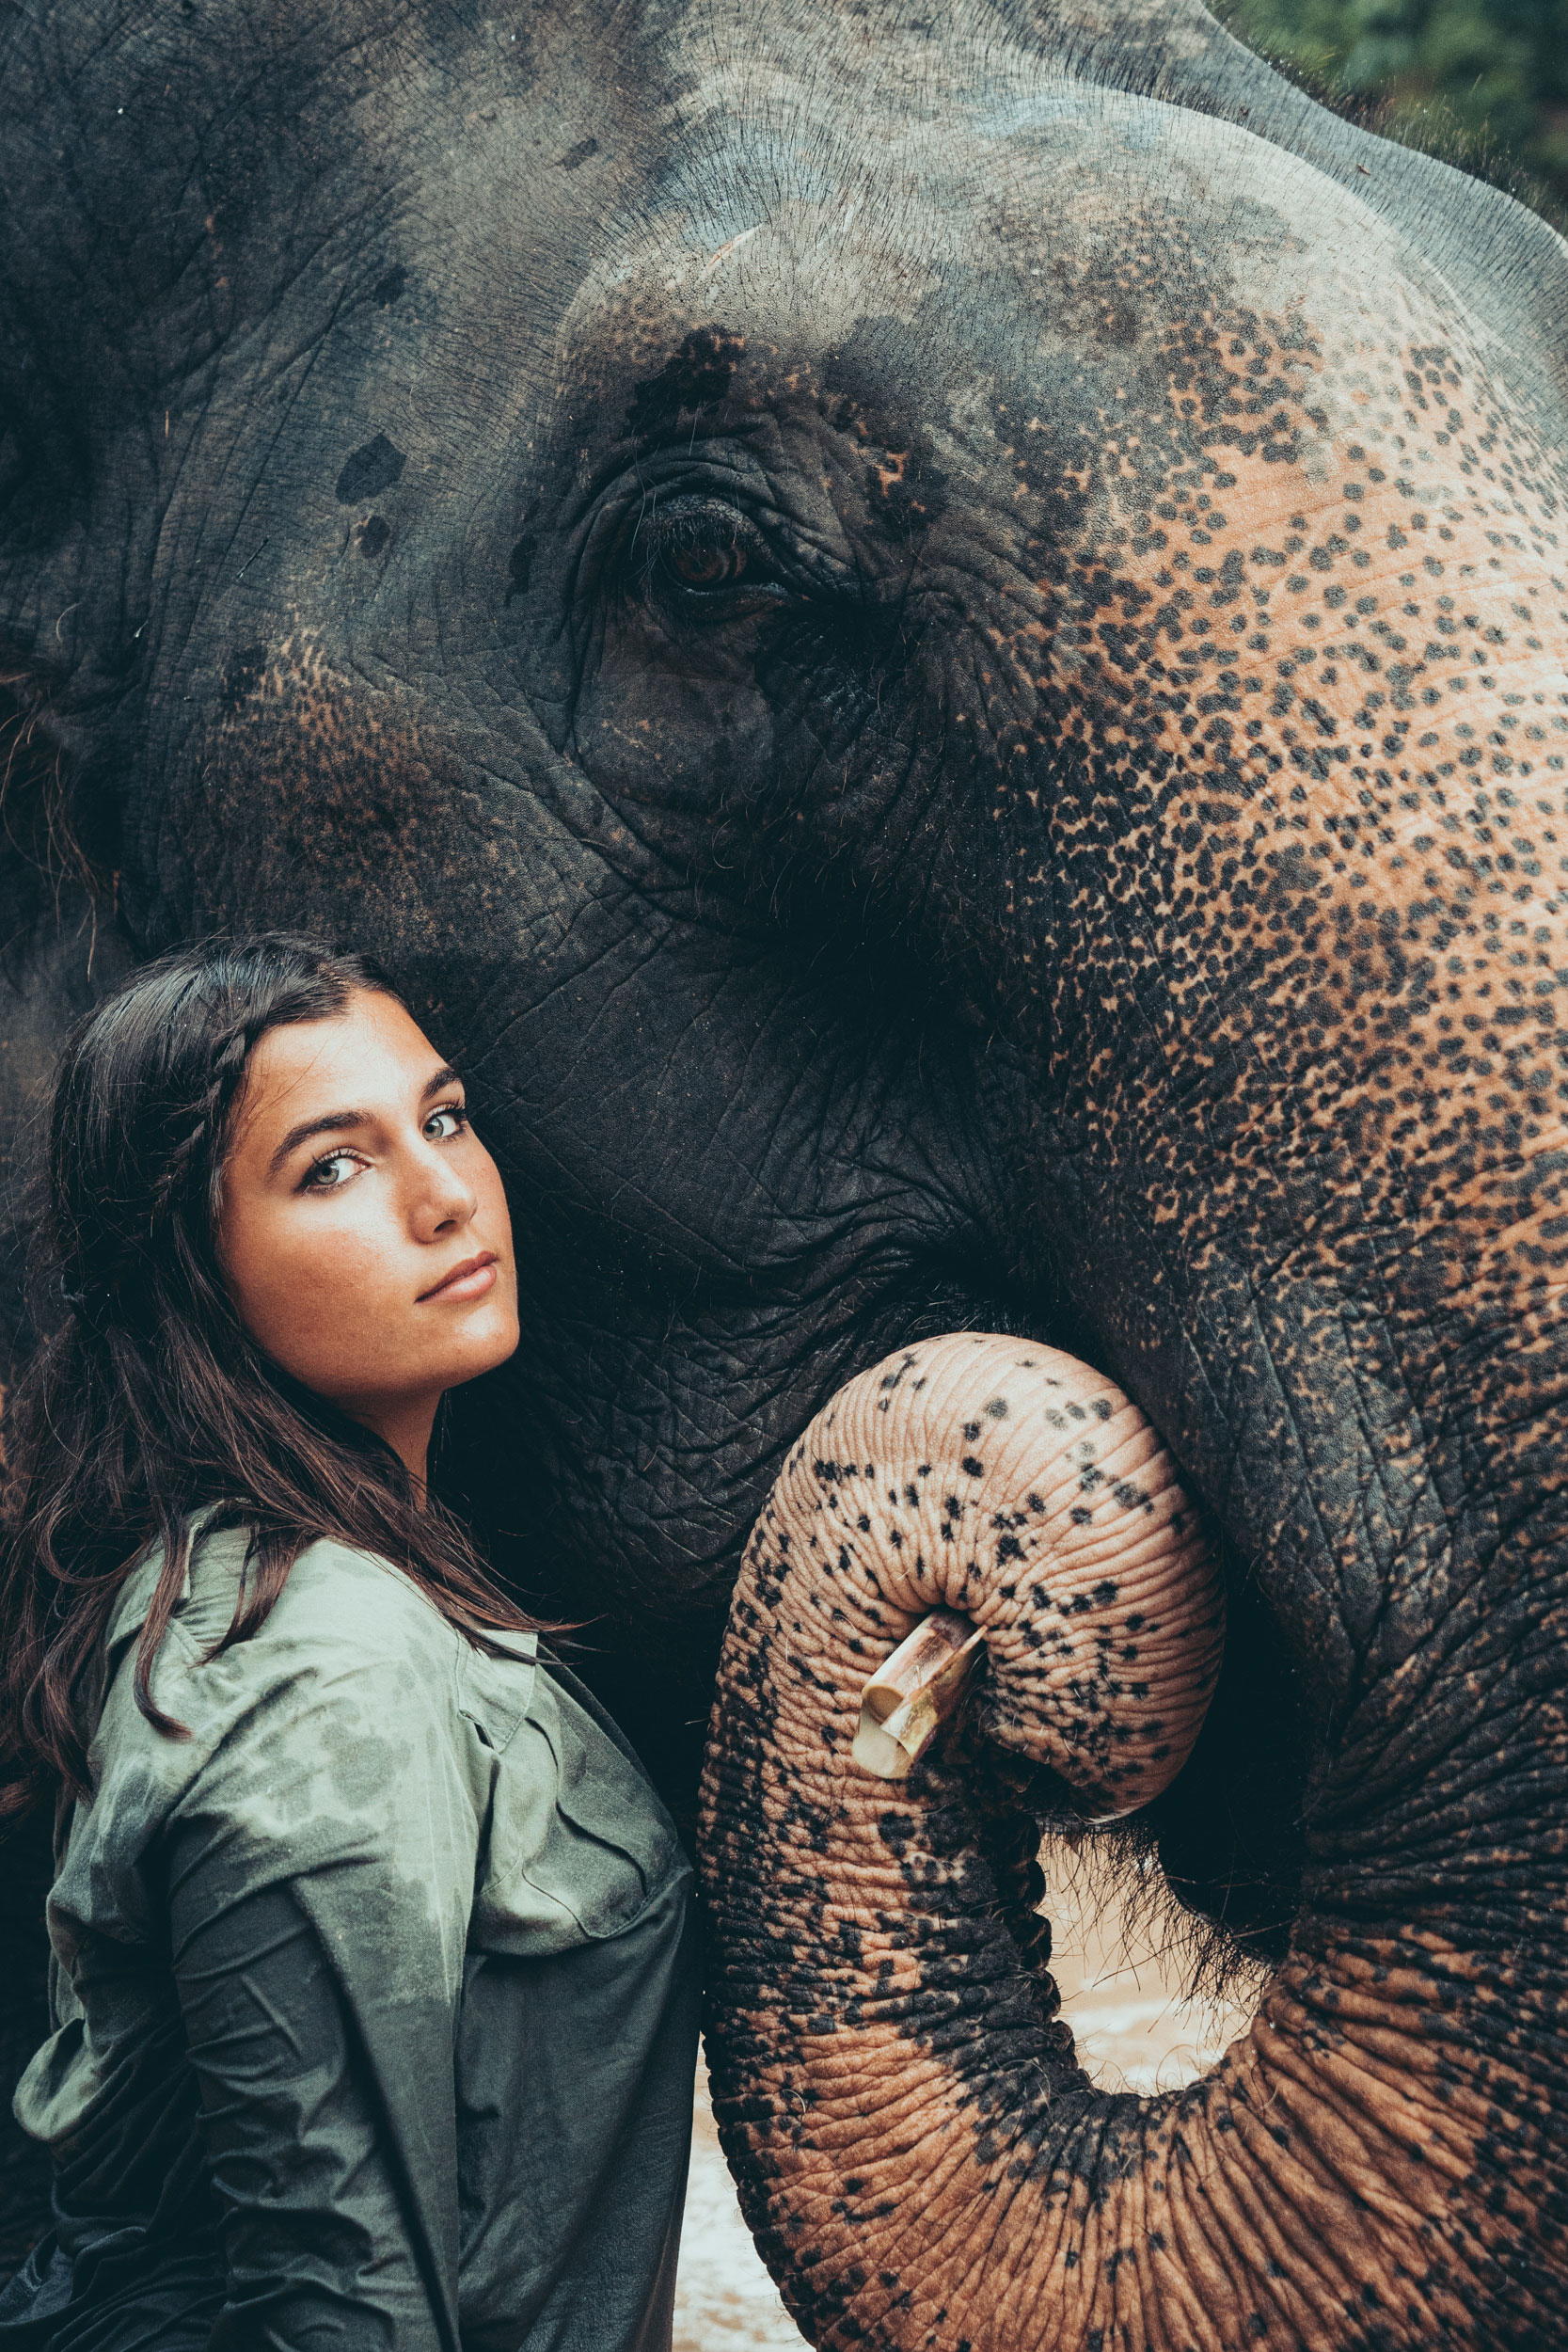 Taking your picture with an elephant